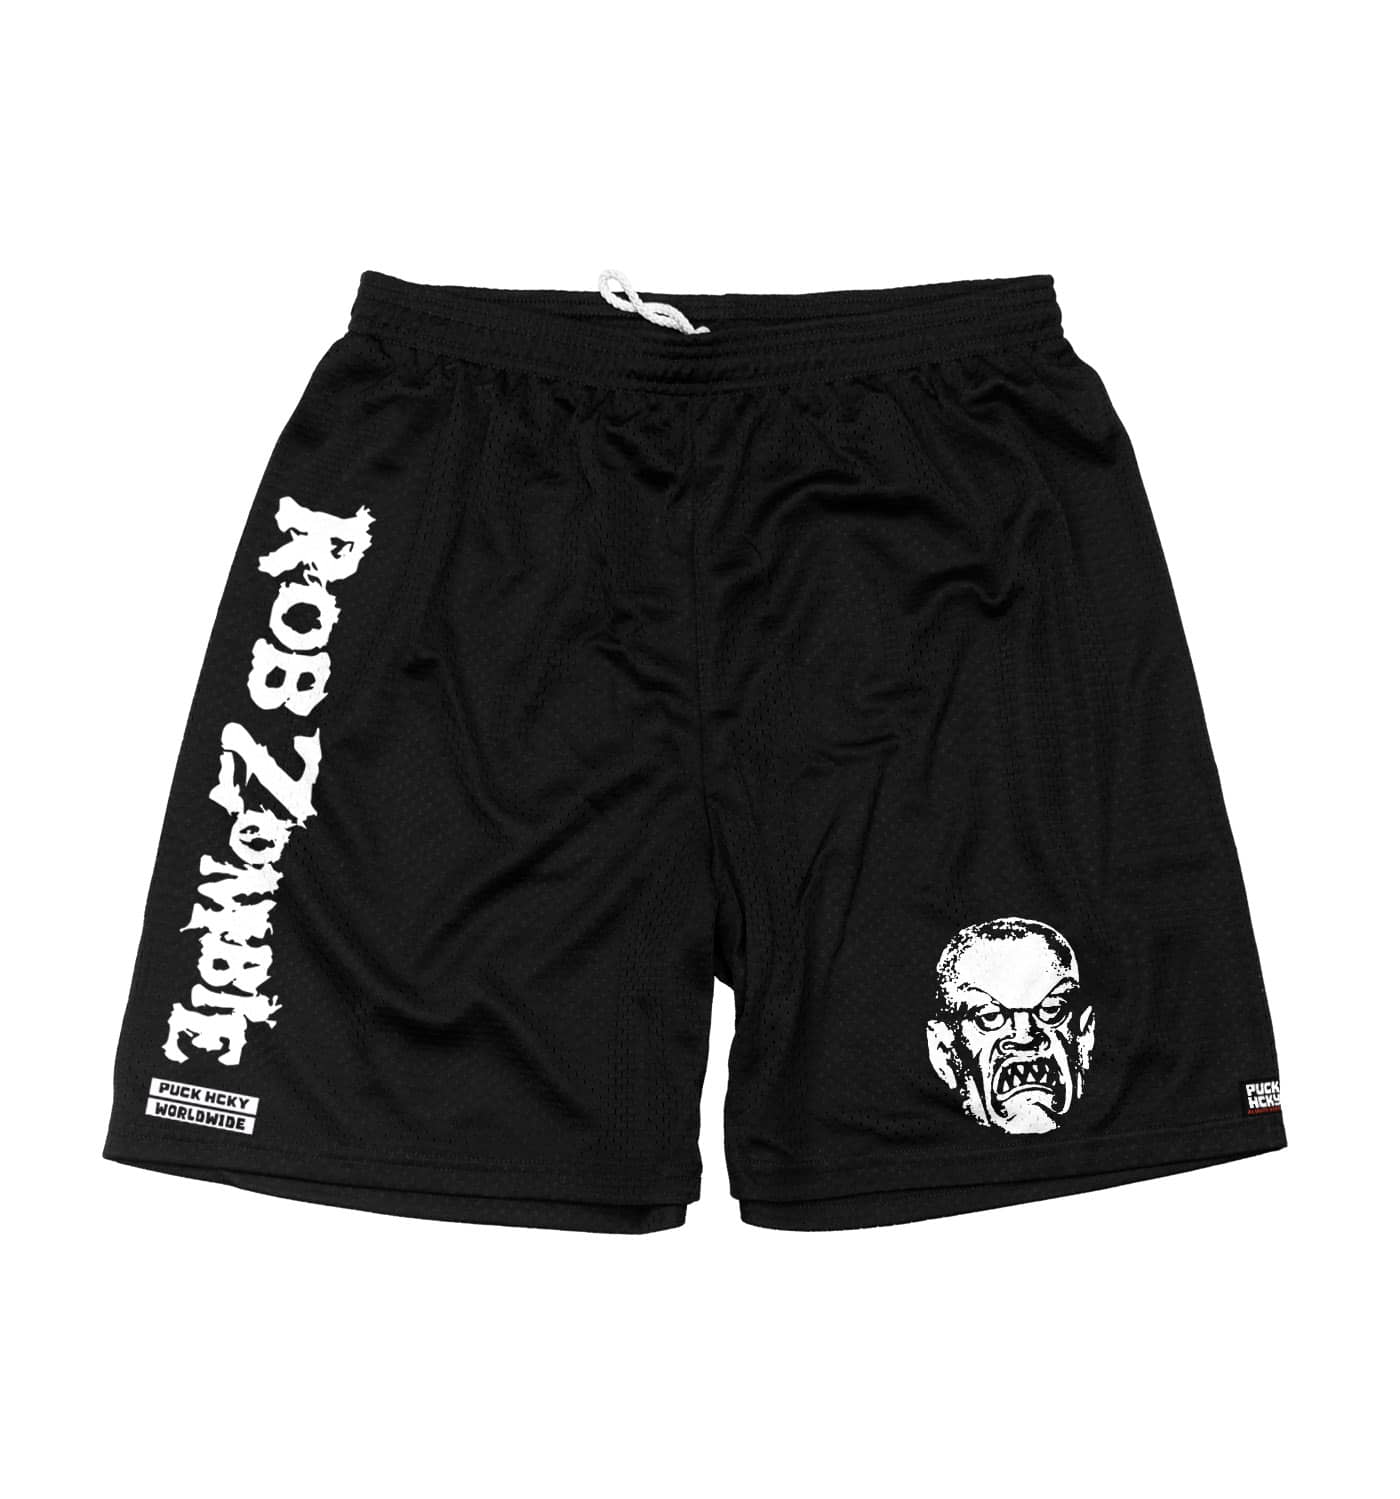 ROB ZOMBIE 'SKATERBEAST' mesh hockey shorts in black front view